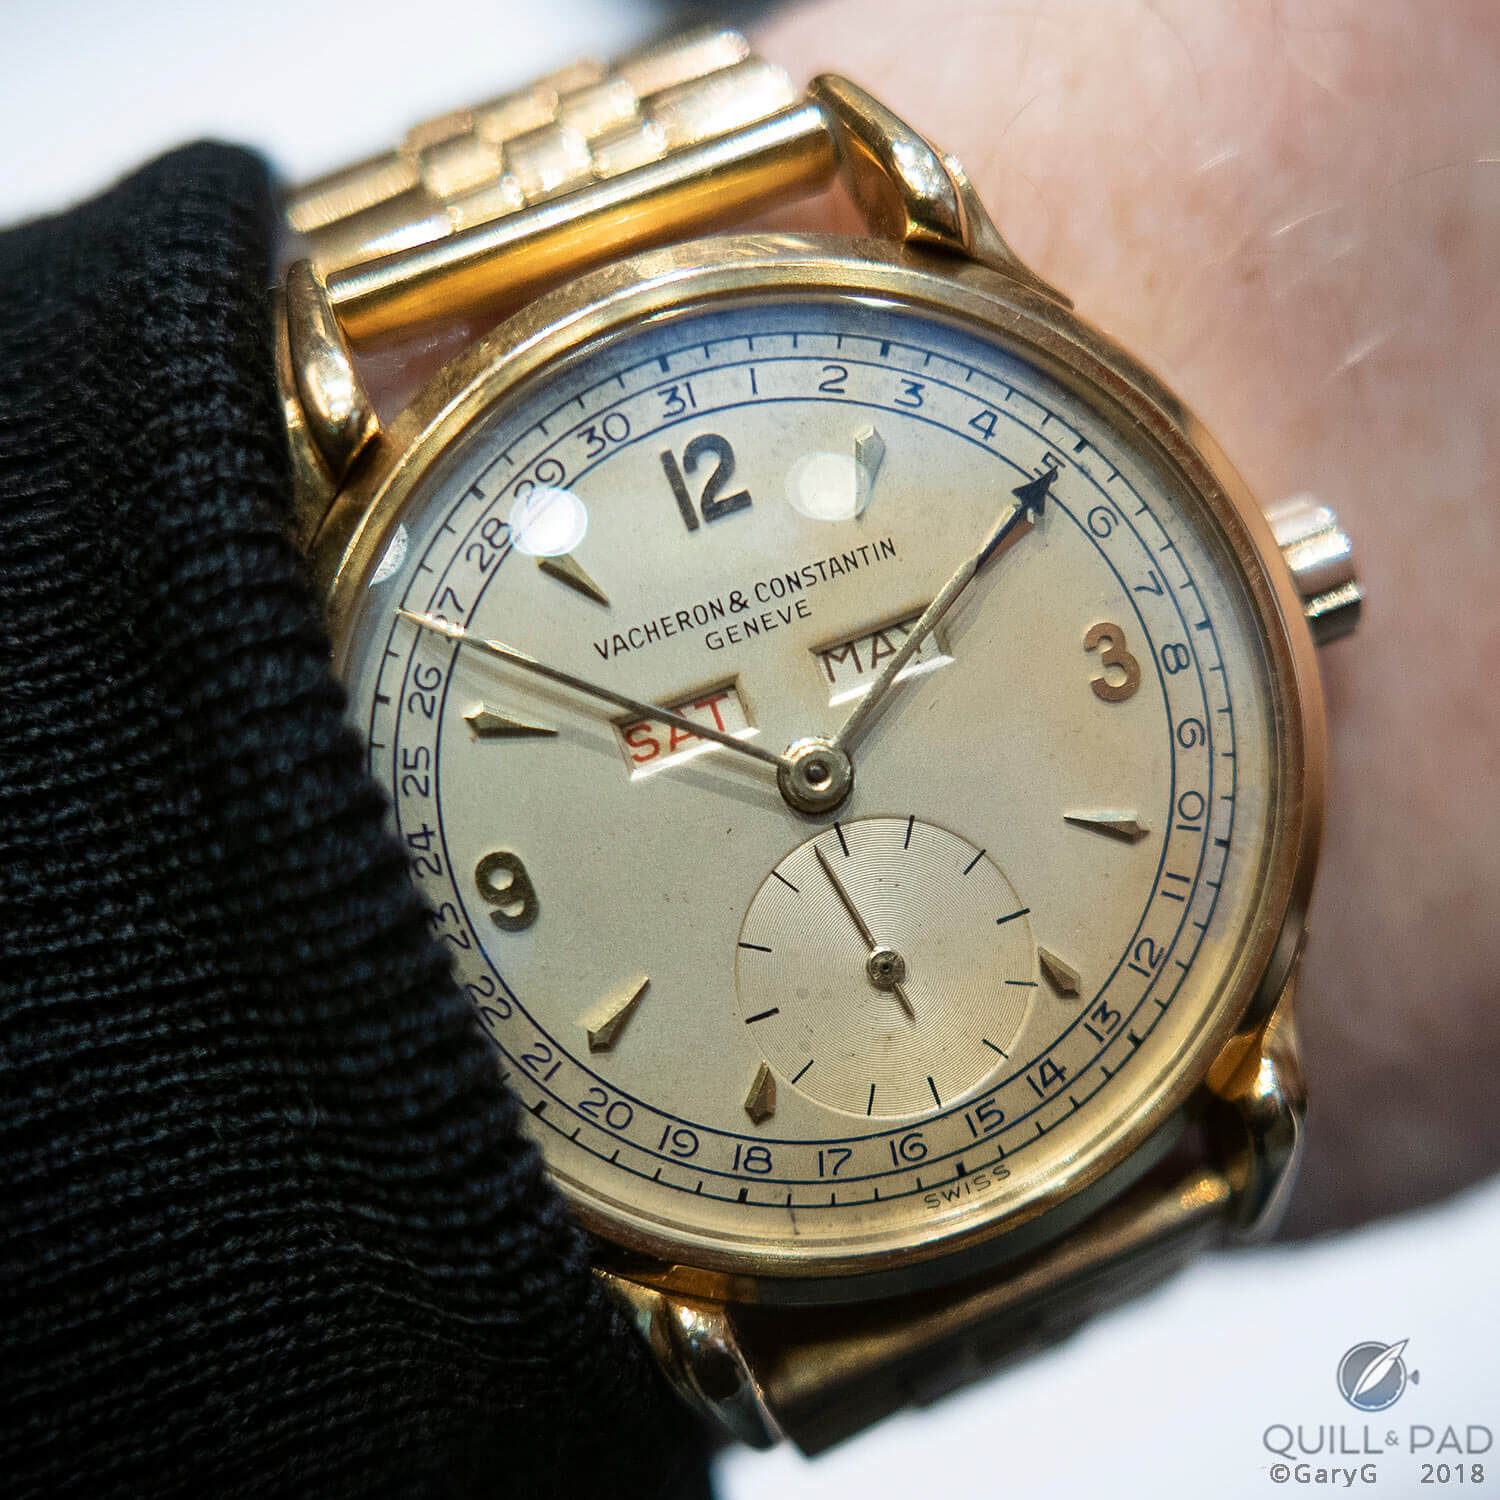 Coming soon to the “Why I Bought It” series: Vacheron Constantin Reference 4560 from 1952